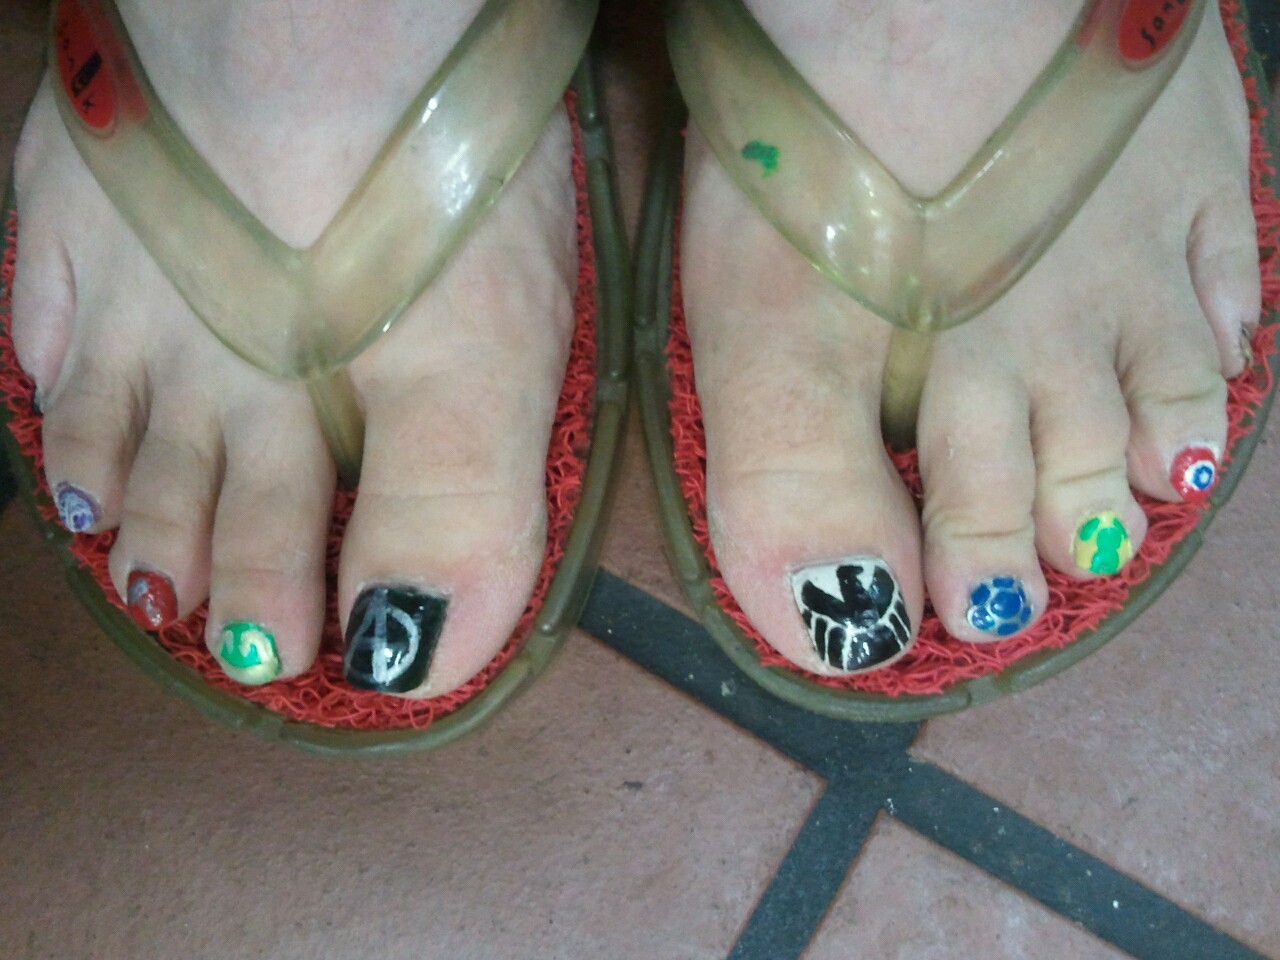 My little toes bend in a weird way! But, here are my Avengers toe nail arts!